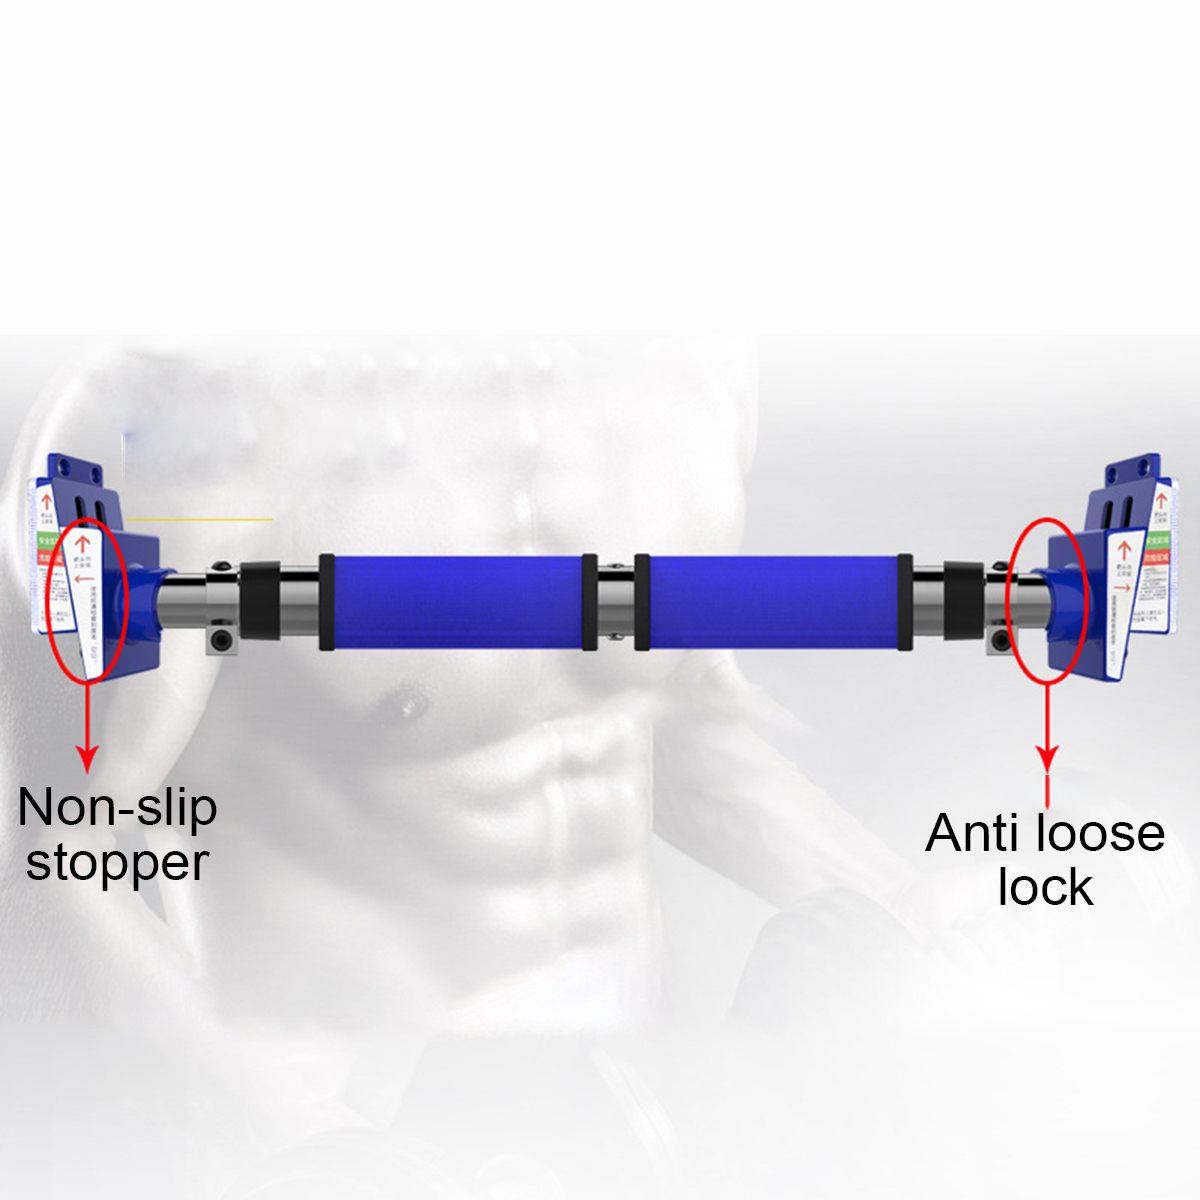 2in1 Door Horizontal Bars Adjustable Steel/Home Gym Workout Chin-Up Pull Up